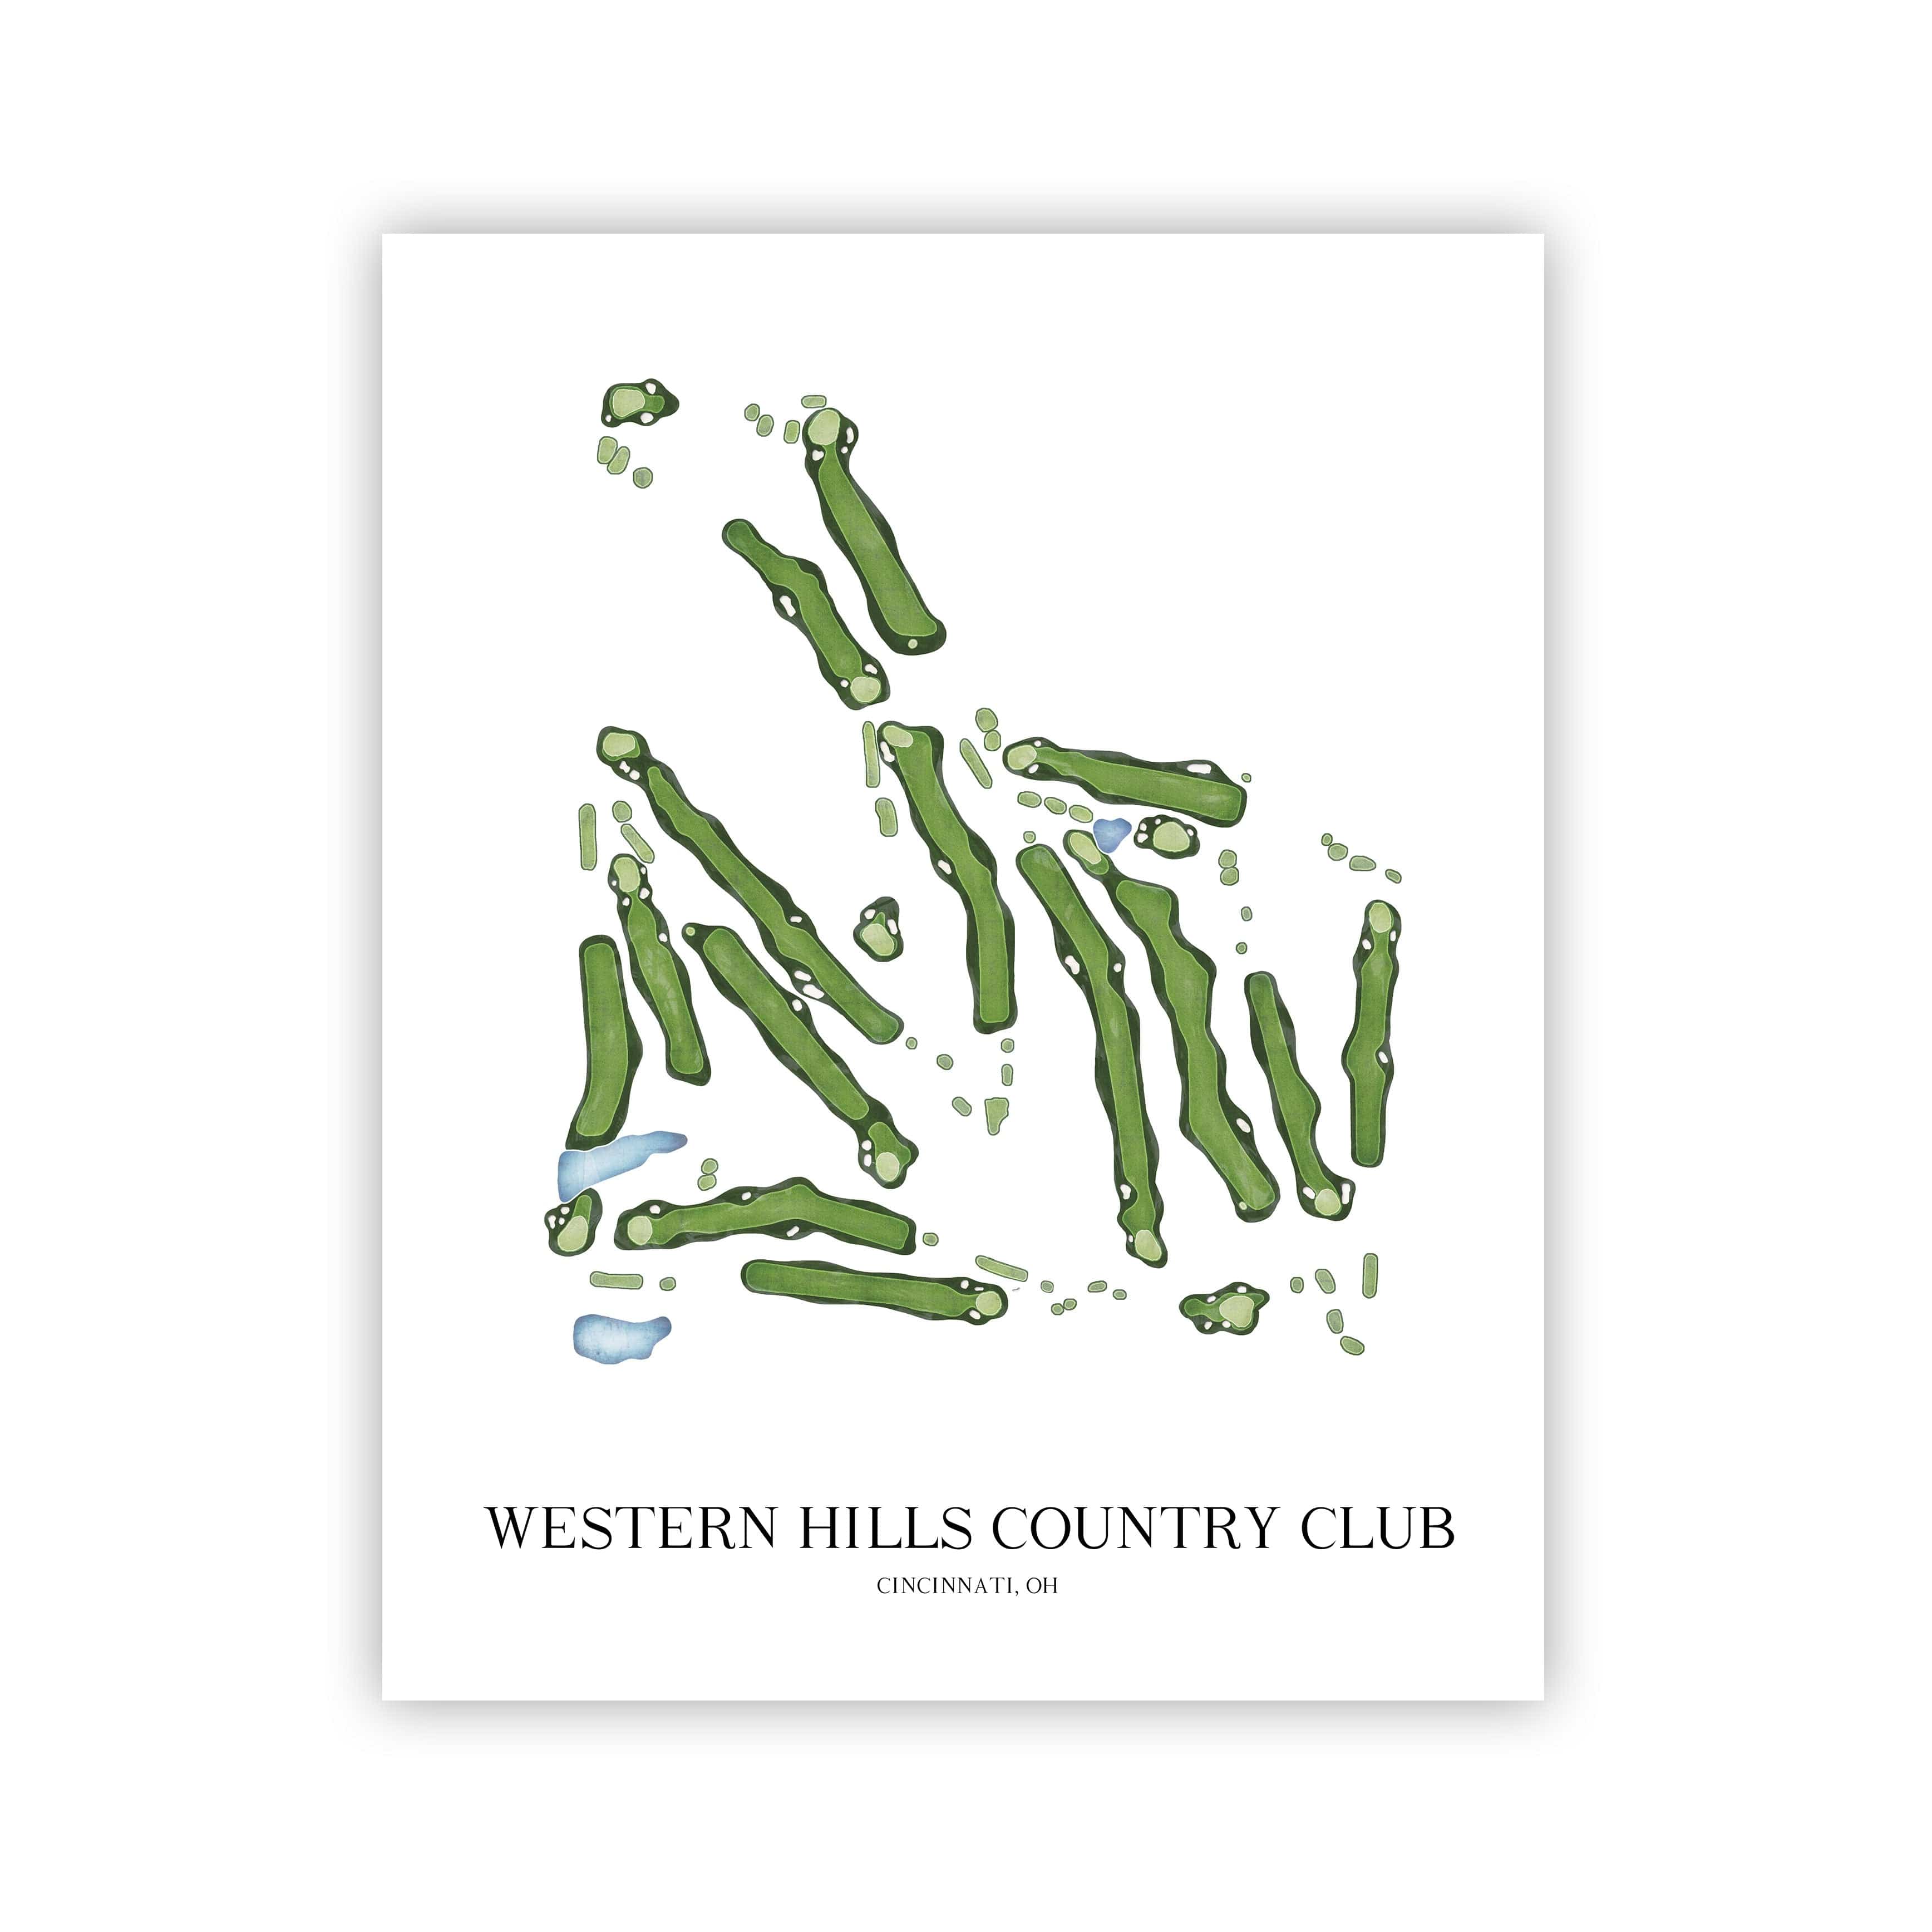 The 19th Hole Golf Shop - Golf Course Prints -  Western Hills Country Club Golf Course Map